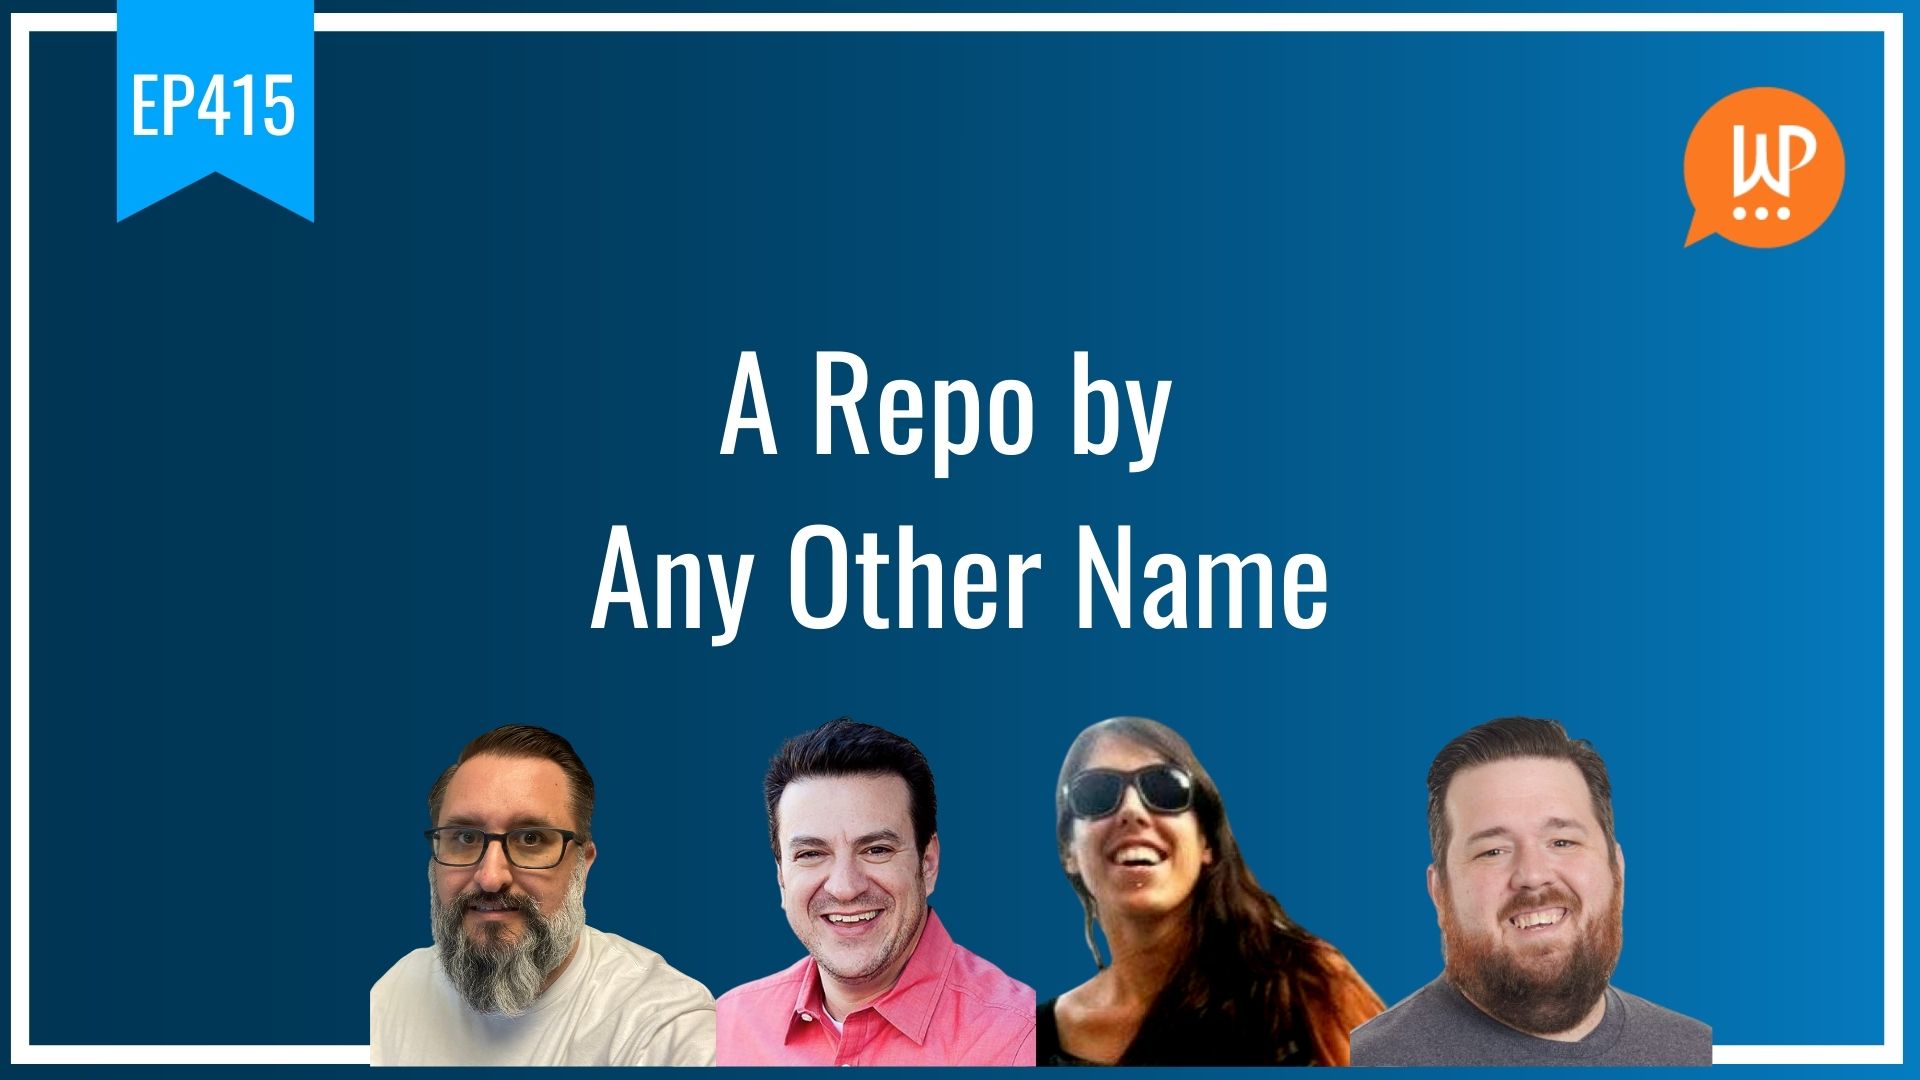 EP415 - A Repo by Any Other Name